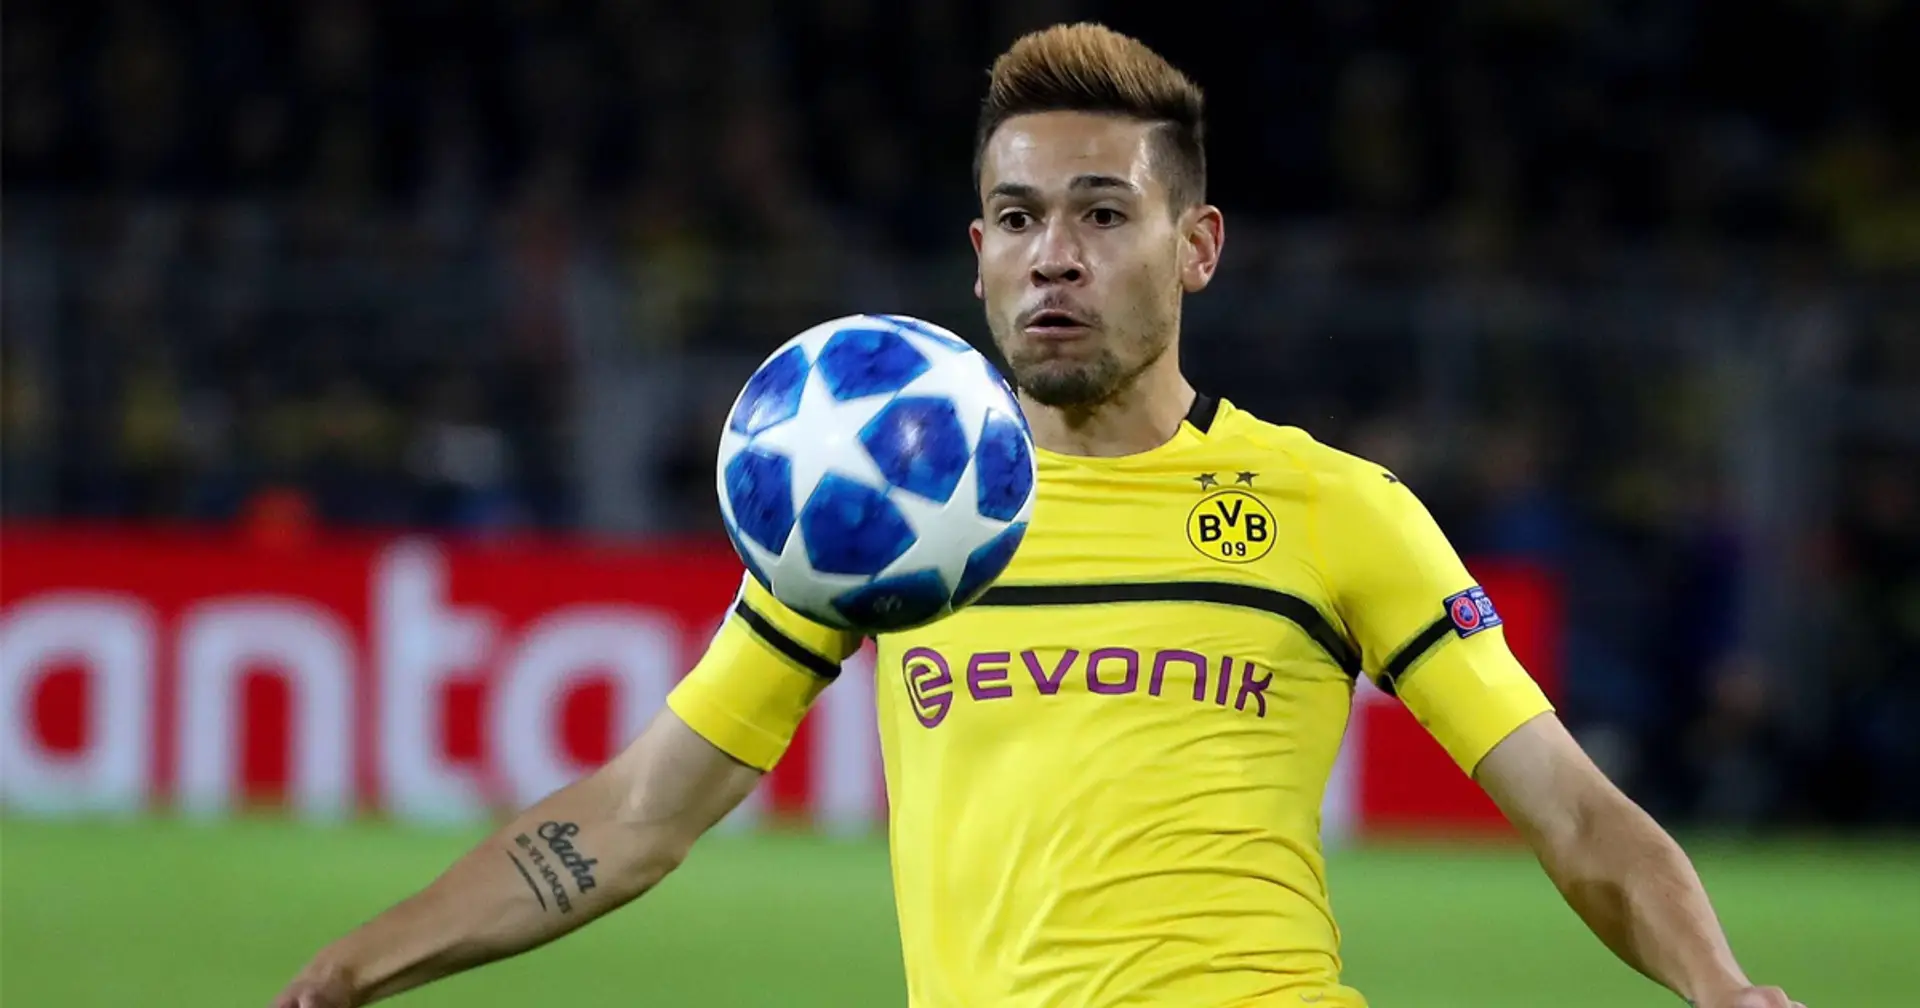 Barca reportedly interested in summer move for Dortmund's €25m-rated left-back Guerreiro